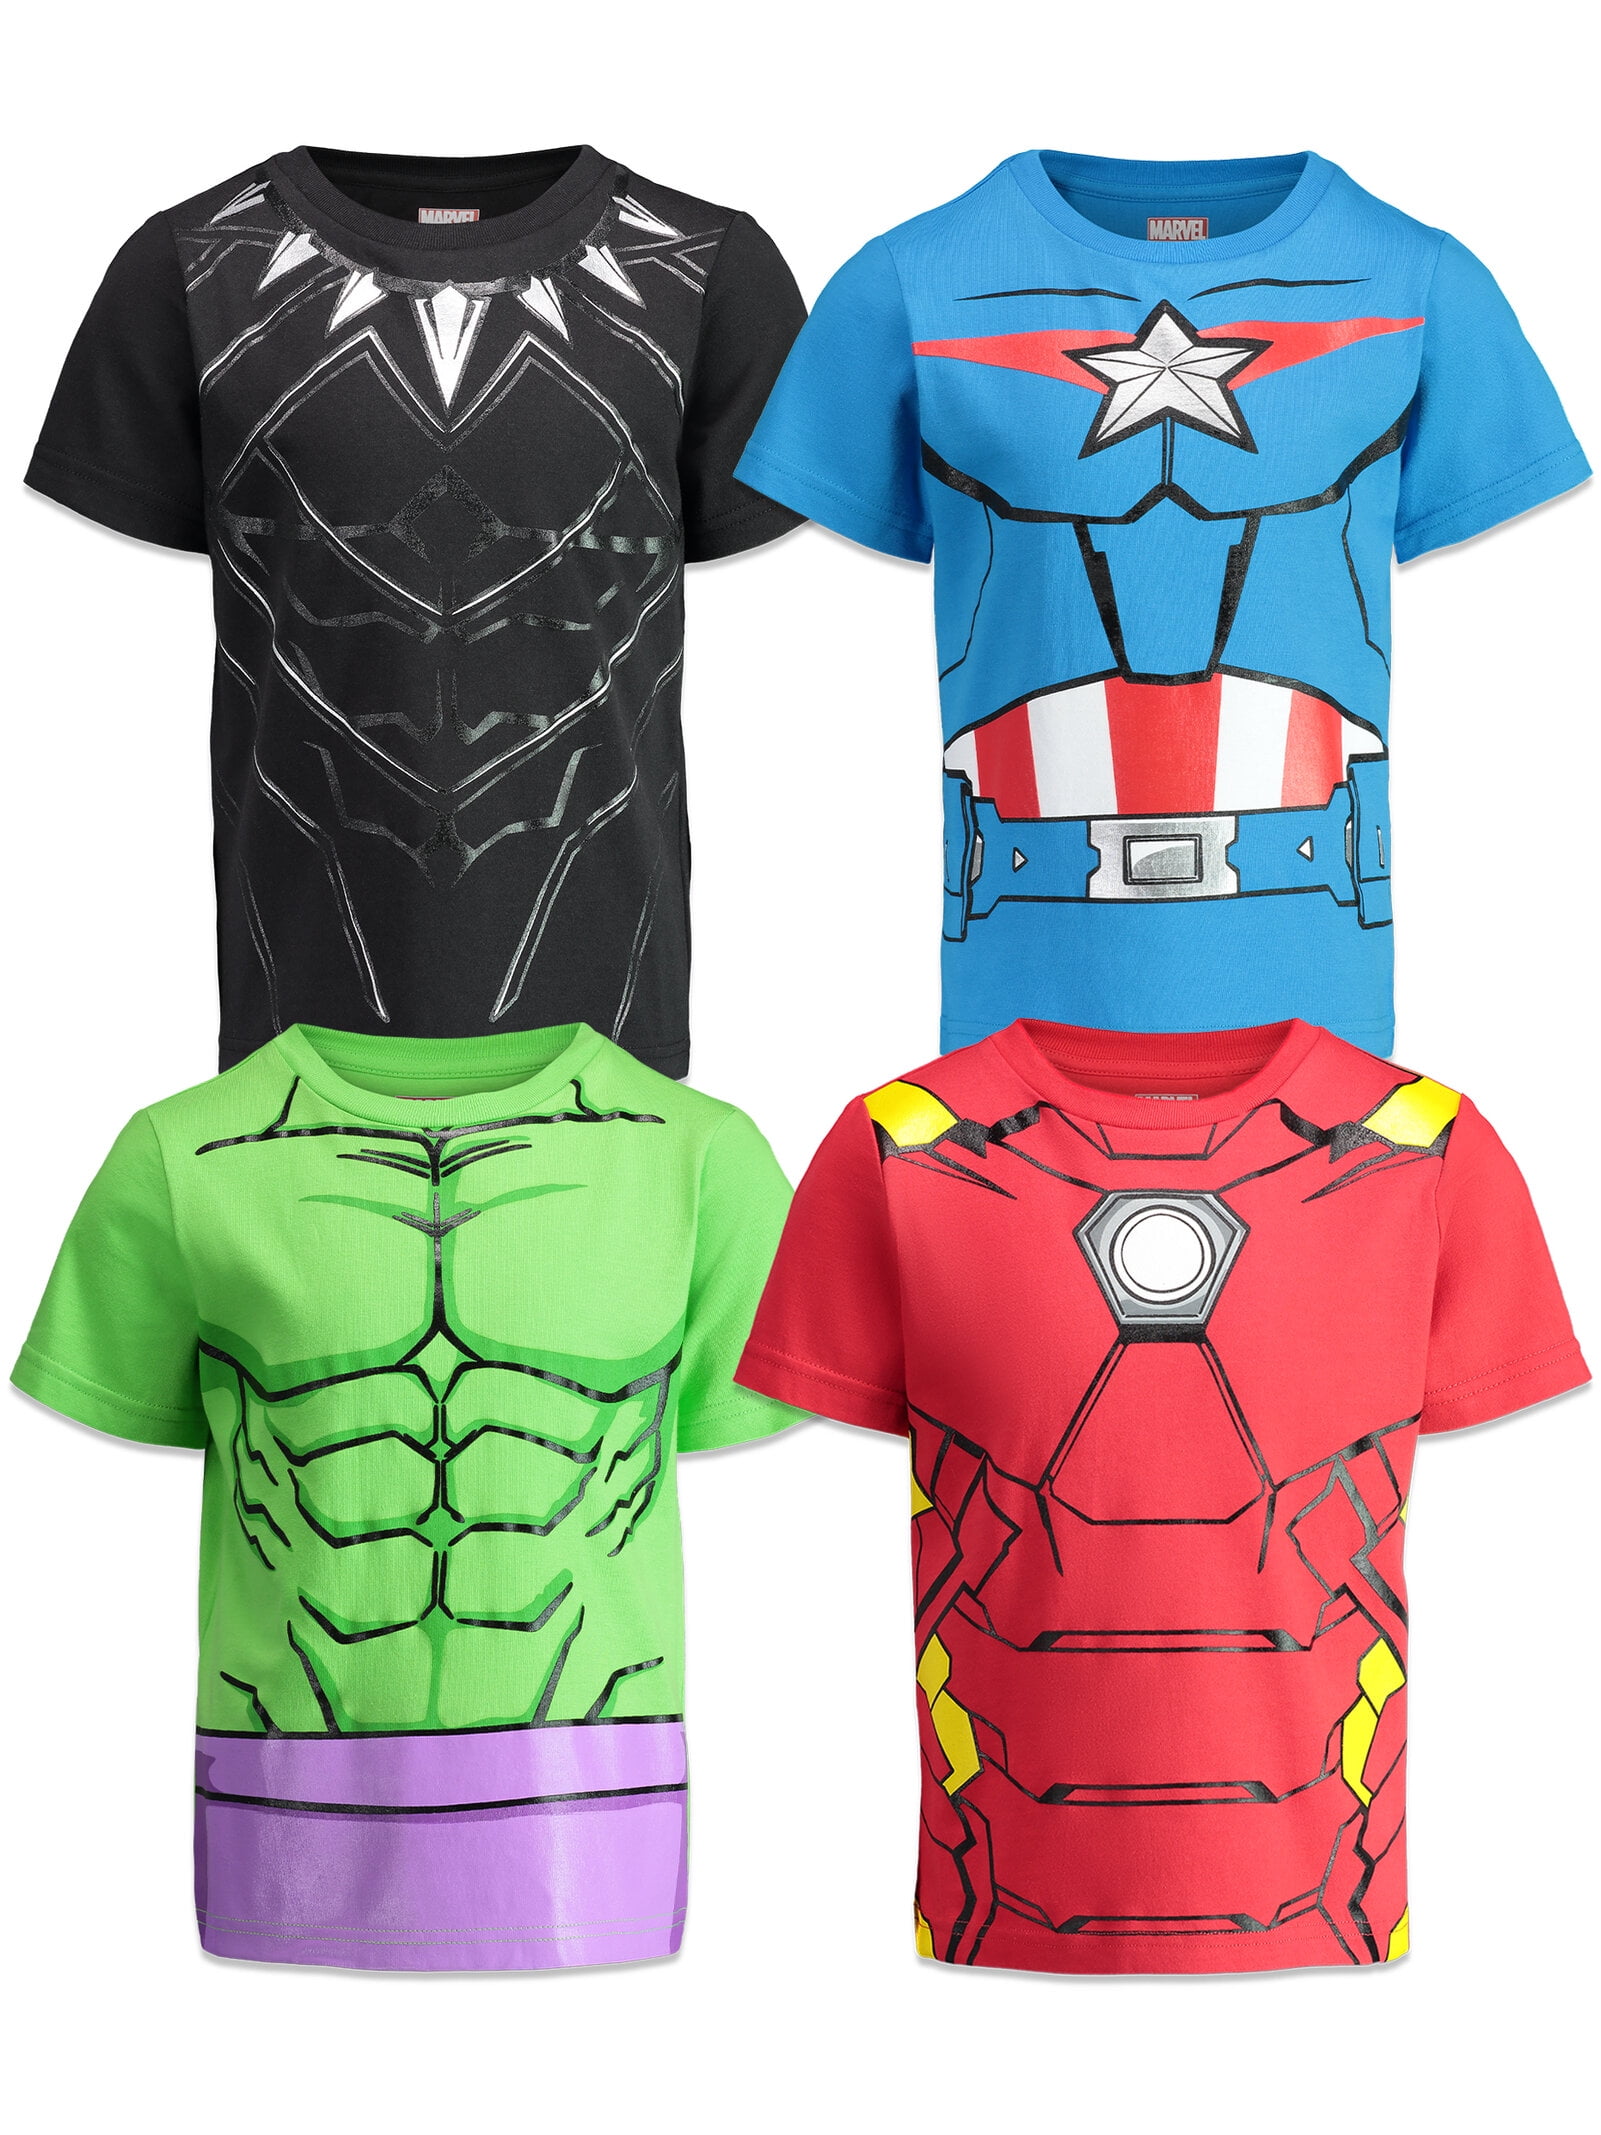 Marvel Avengers Spider-Man Iron Man Captain Toddler 4 Big Cosplay Pack T-Shirts to America Kid Athletic